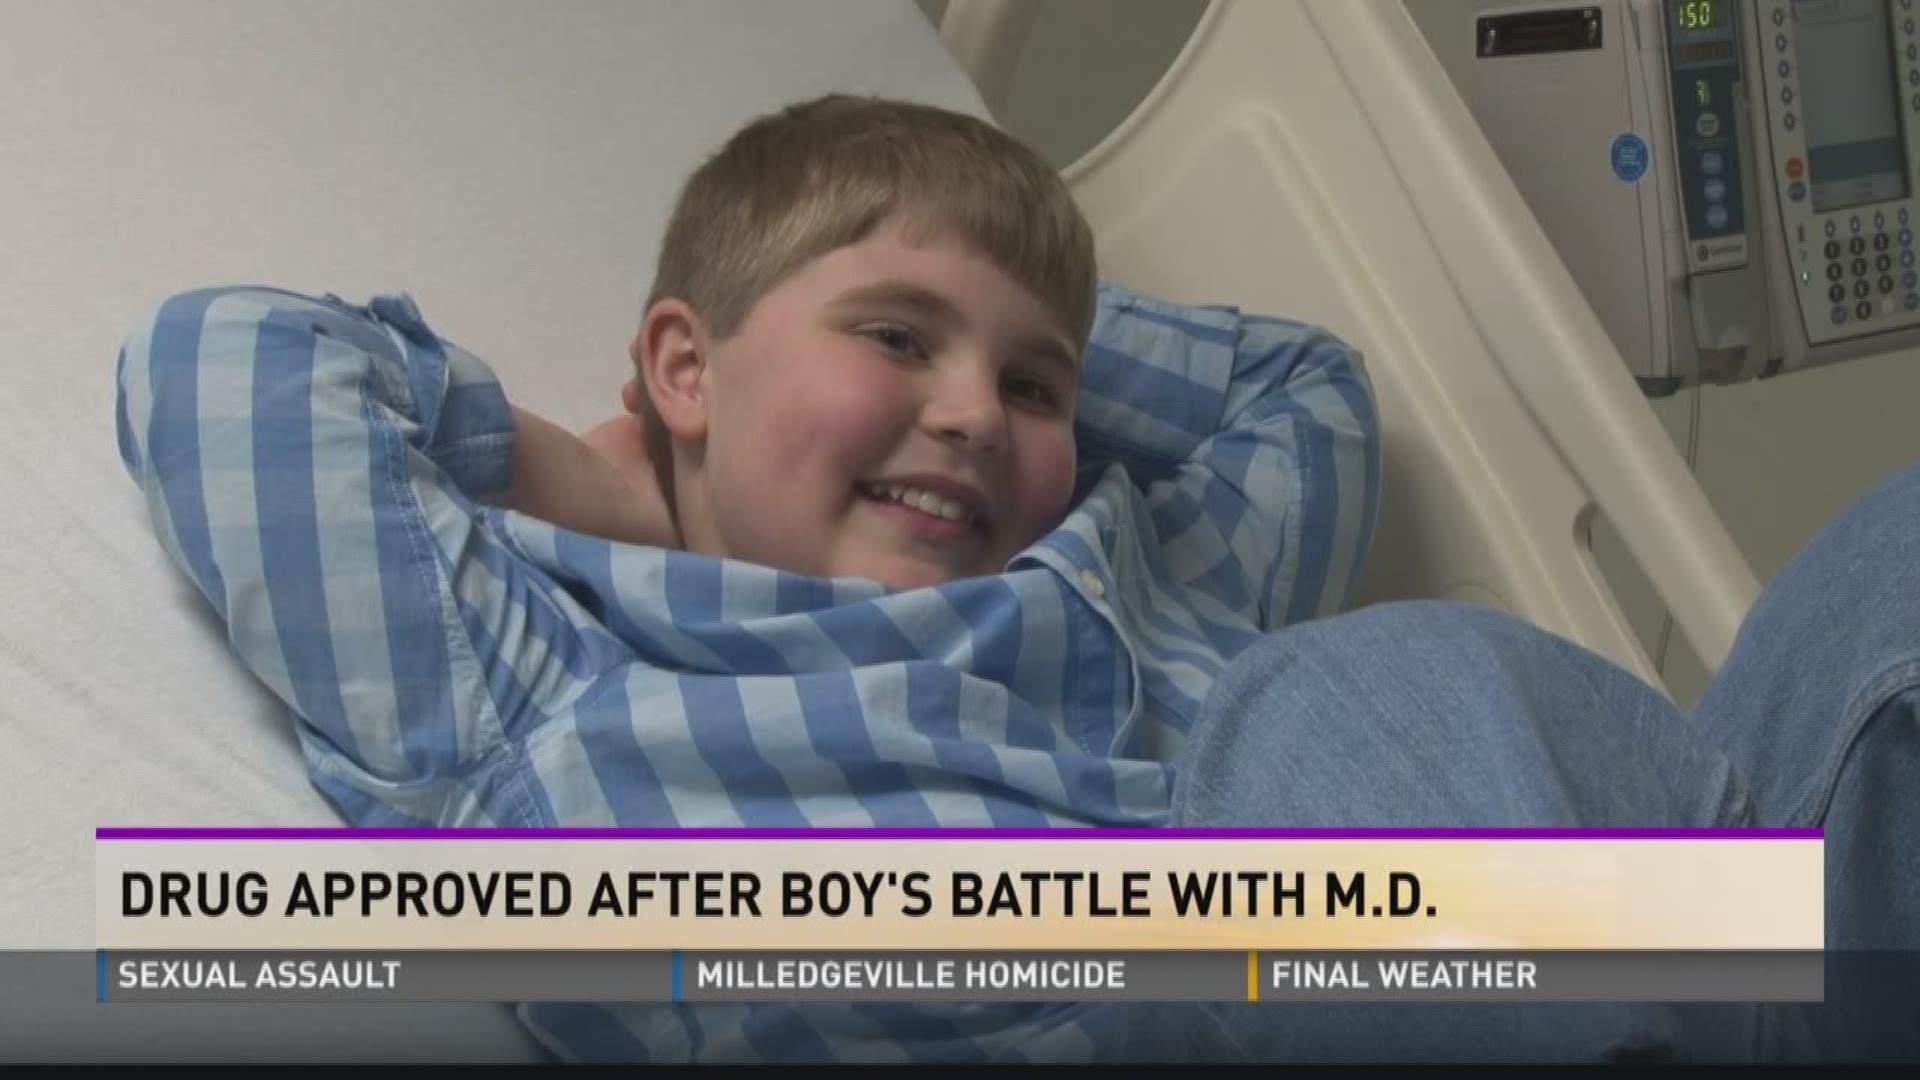 Drug approved after boy's battle with muscular dystrophy